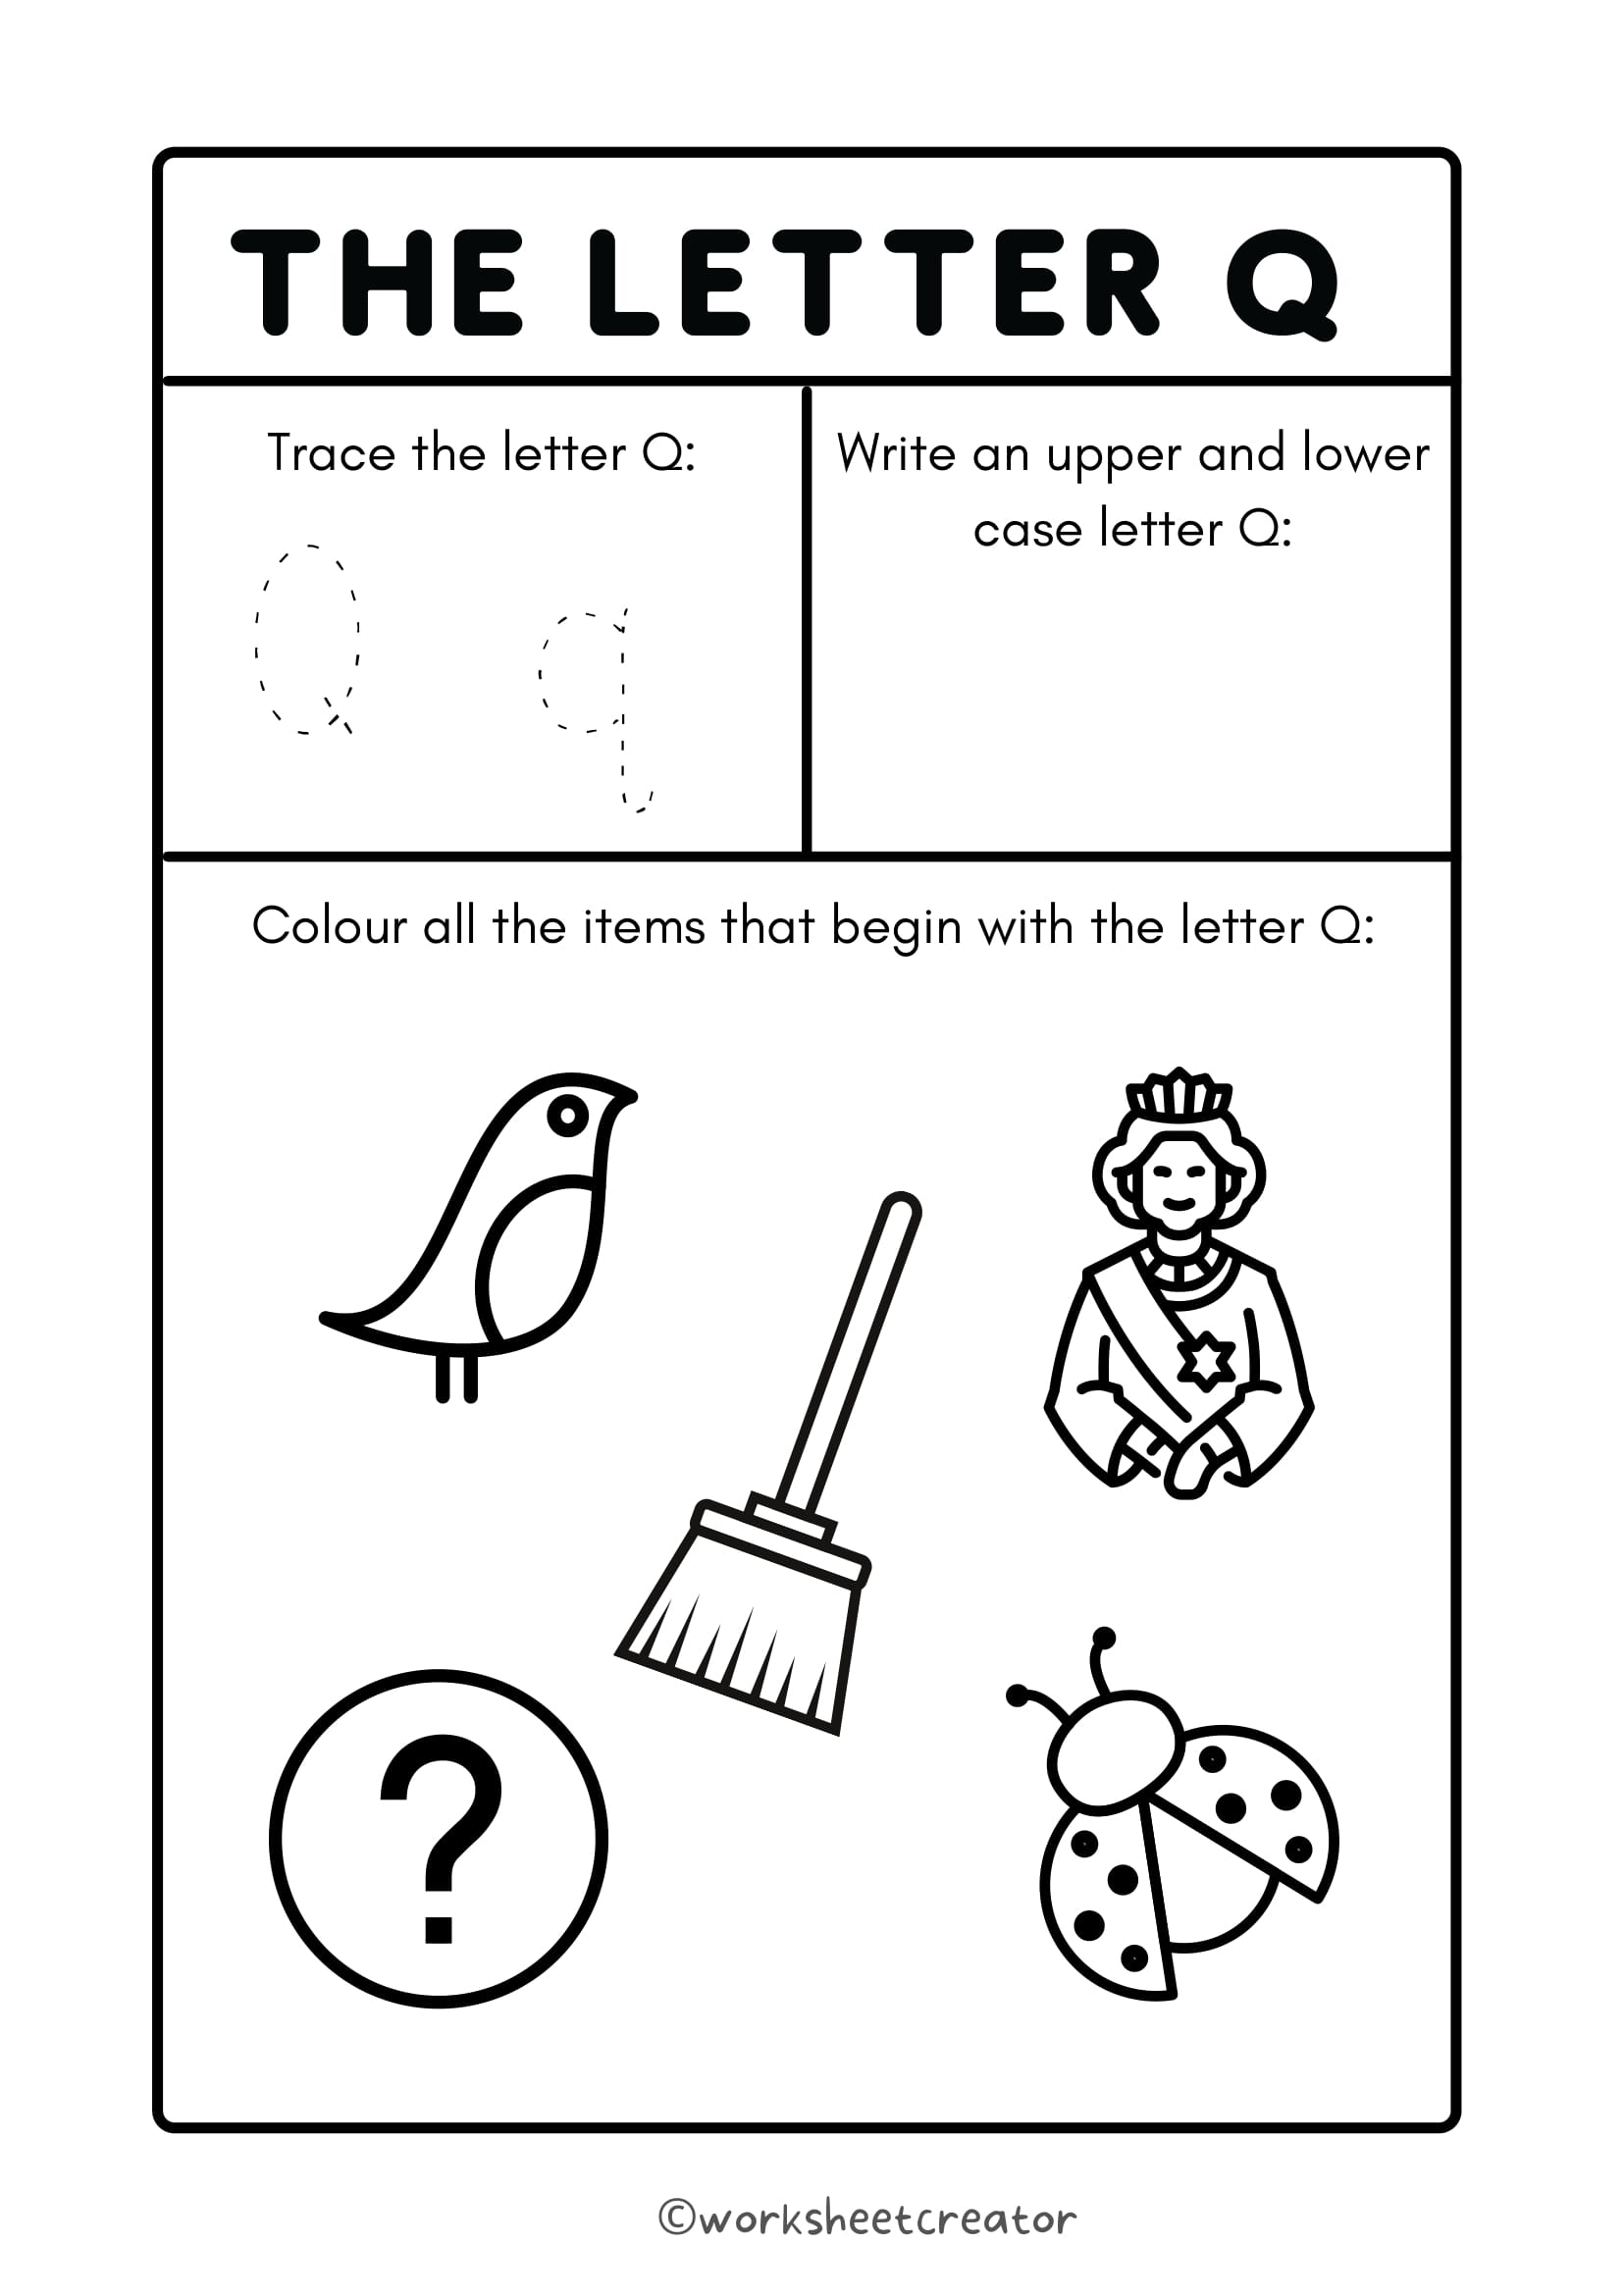 A to Z letter tracing worksheets pdf free download